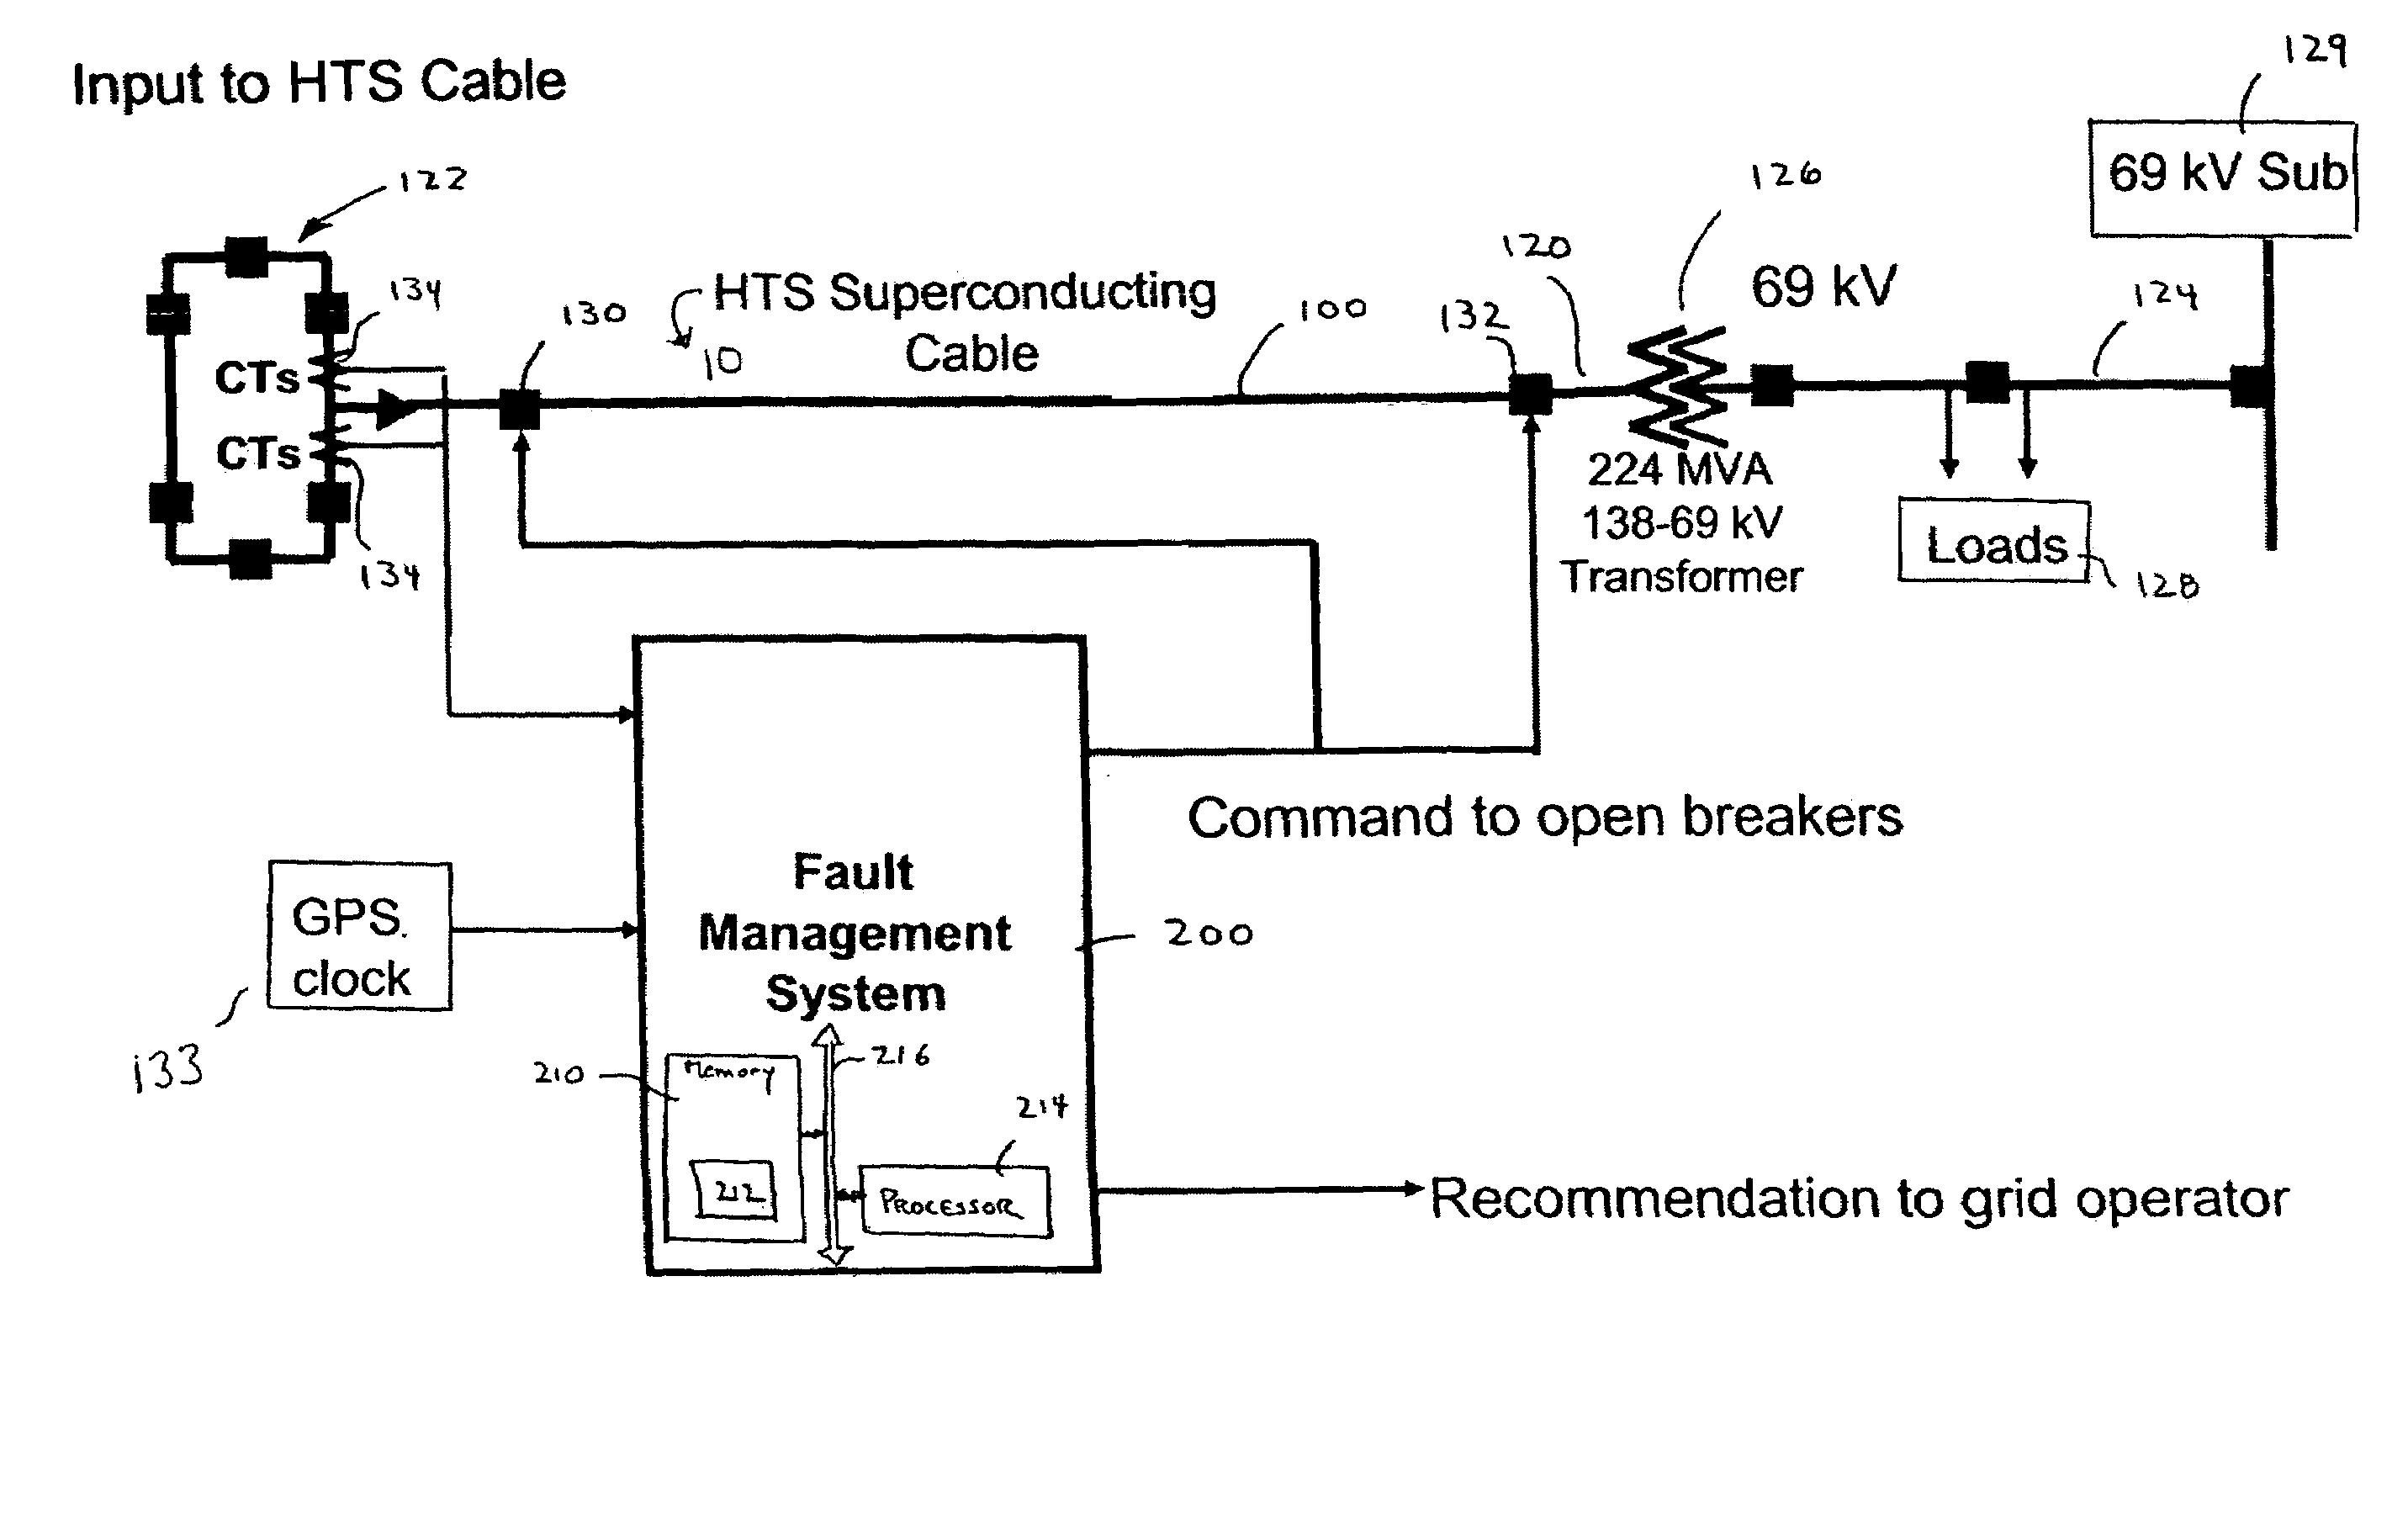 Fault management of high temperture superconductor cable